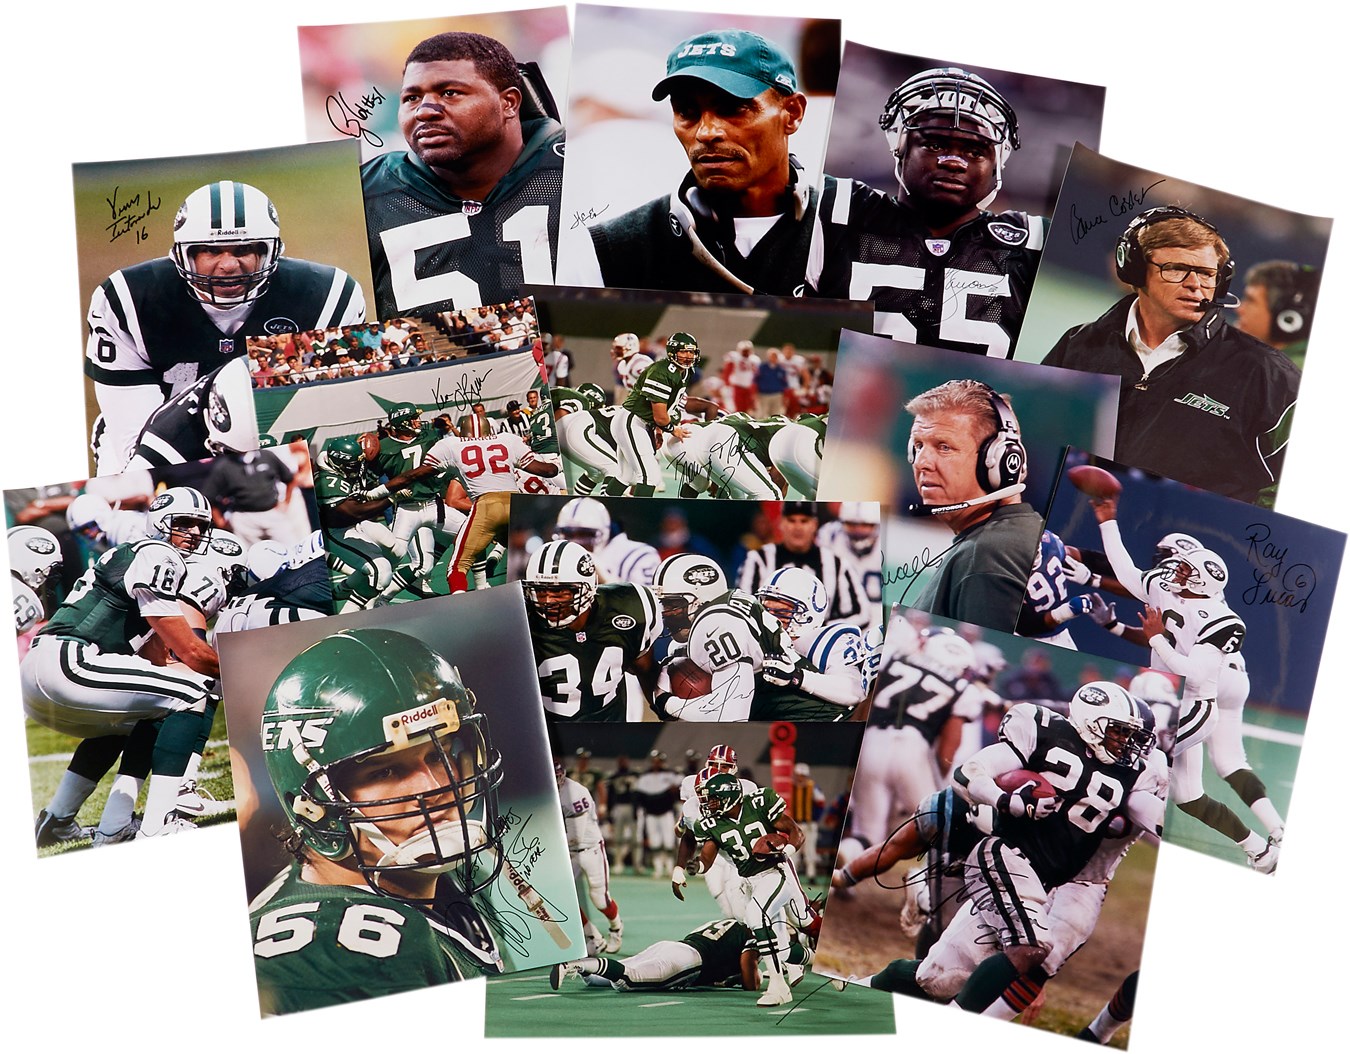 1980s-90s New York Jets Signed 16x20” In Person Signed Photographs from VIP Photographer Richard Brightly (14)